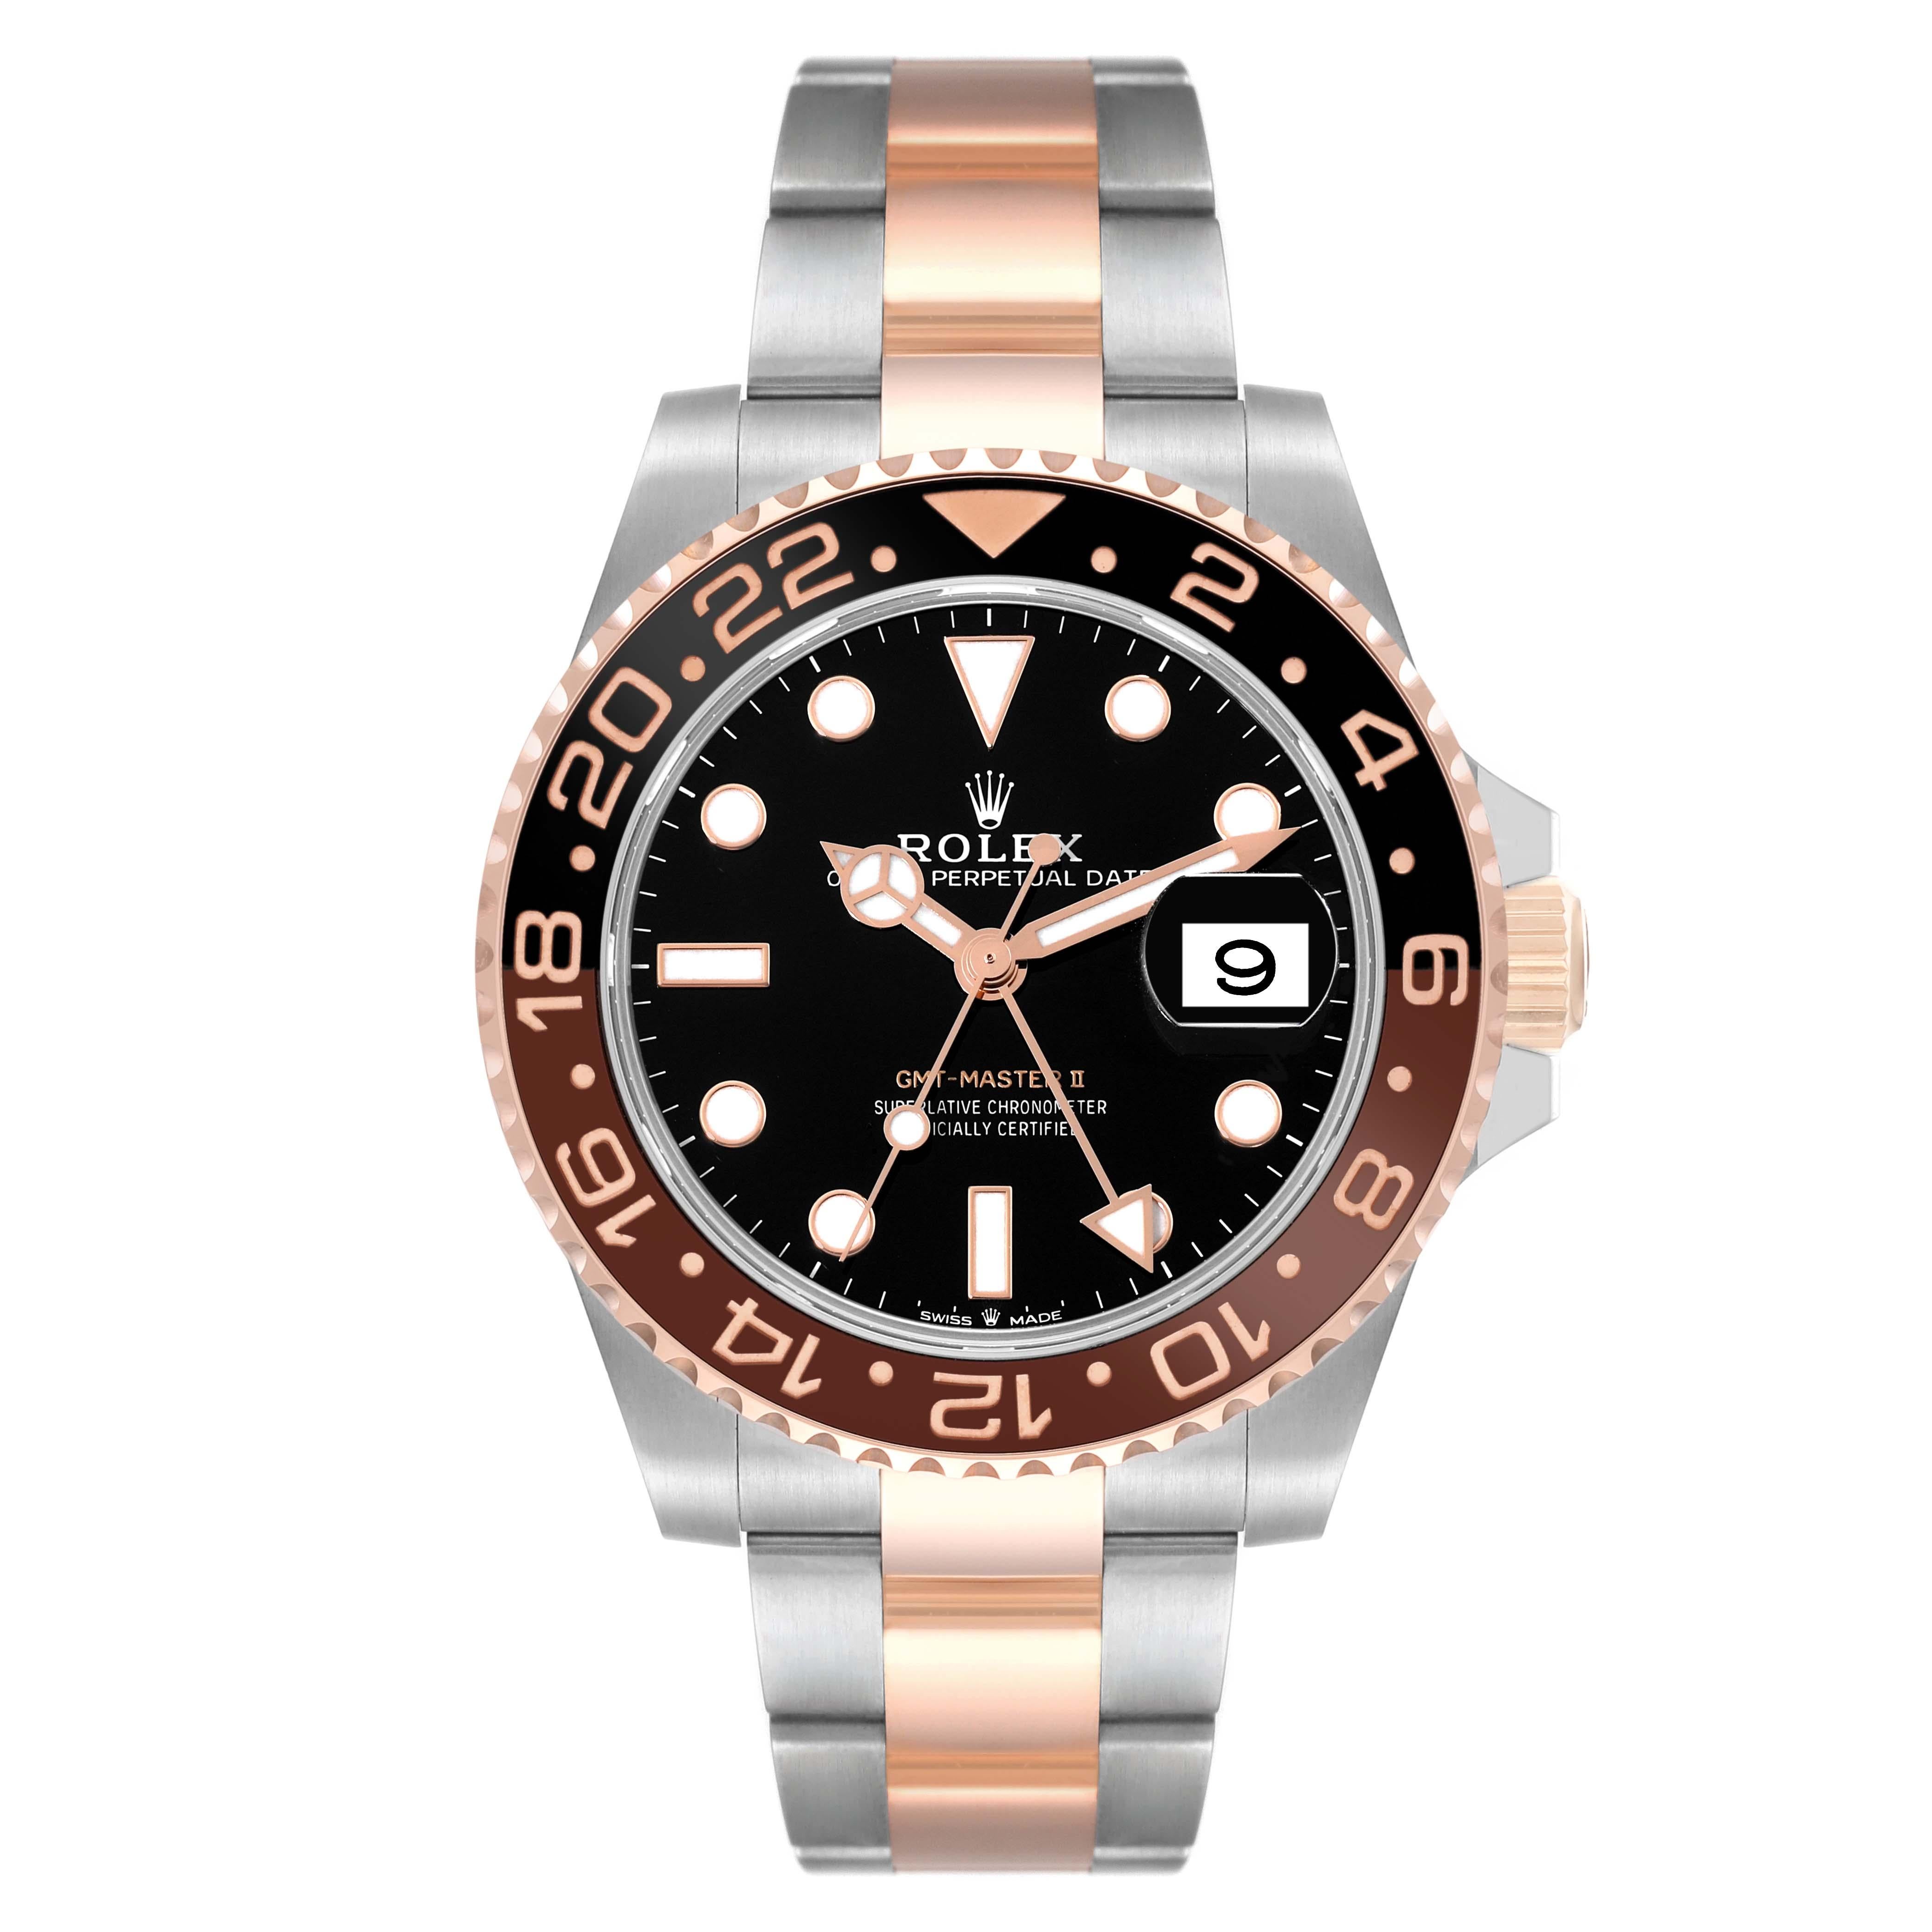 Rolex GMT Master II Steel Rose Gold Mens Watch 126711 Unworn. Officially certified chronometer automatic self-winding movement. Stainless steel and 18K rose gold case 40.0 mm in diameter. Rolex logo on a crown. 18K Everose gold bidirectional